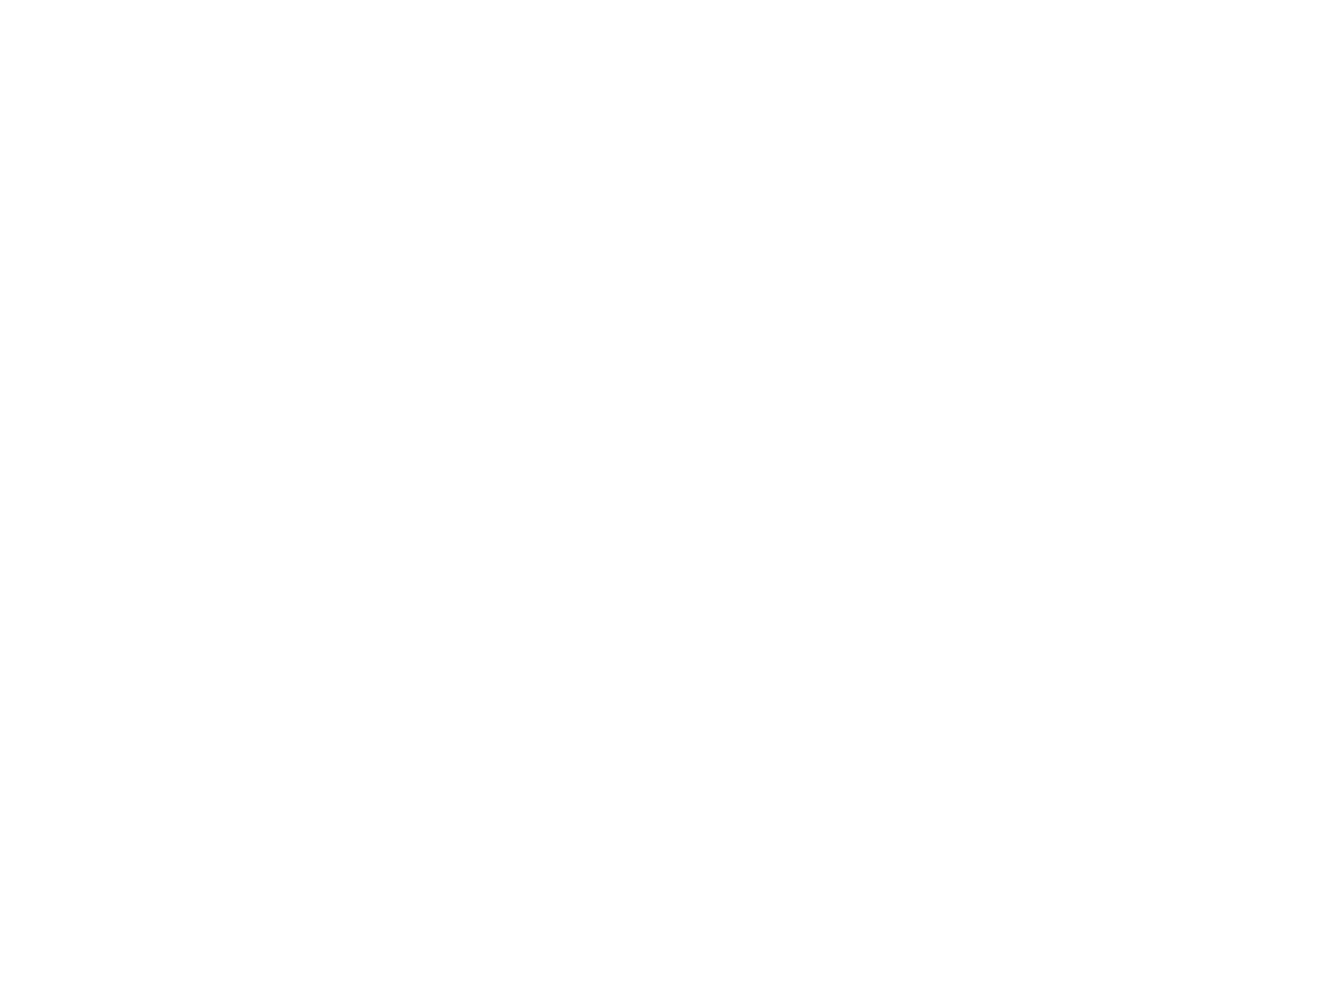 HAND HAND by APP